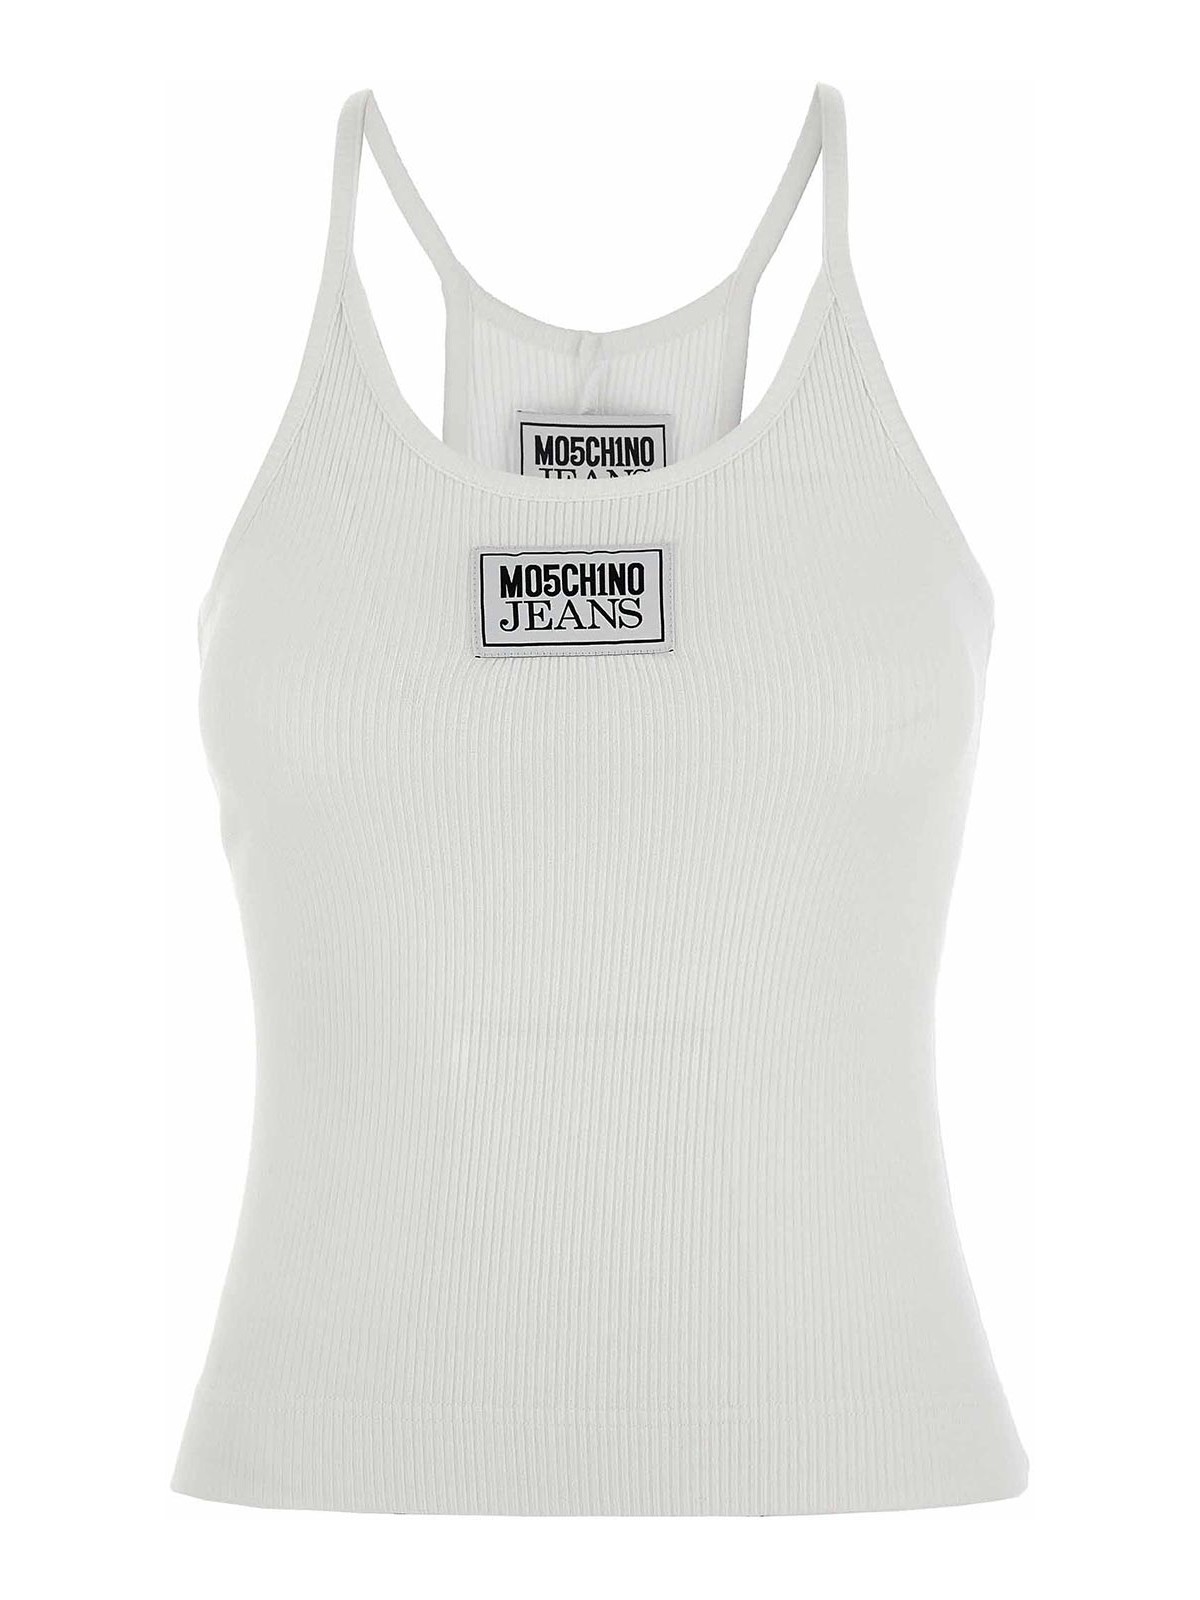 Moschino Jeans Tank Top Logo Label In White